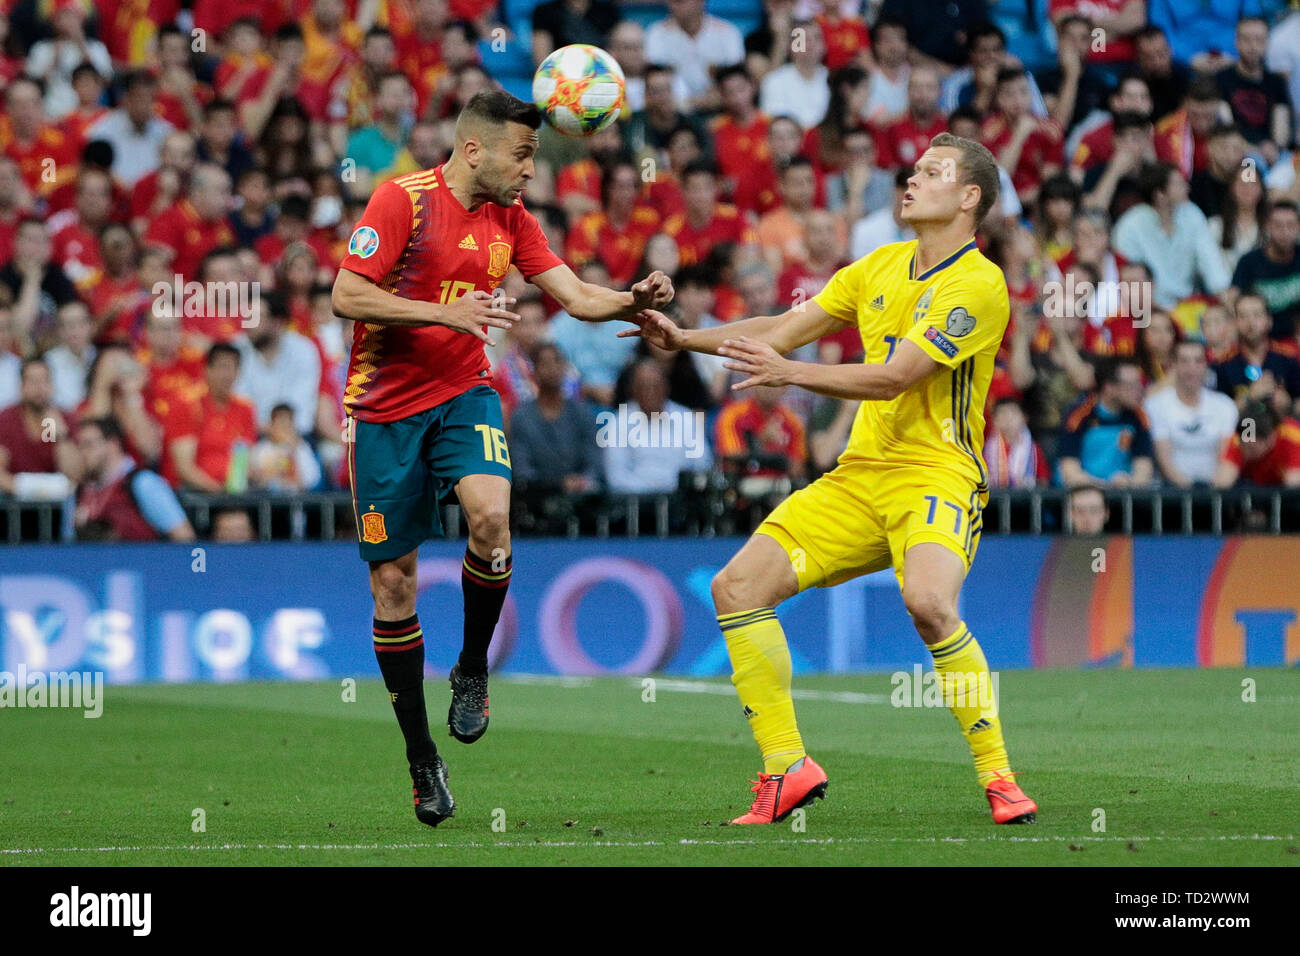 Spain national team player Jordi Alba and Sweden national team player Viktor Claesson seen in action during the UEFA EURO 2020 Qualifier match between Spain and Sweden at Santiago Bernabeu Stadium in Madrid. Final score: Spain 3 - Sweden 0 Stock Photo